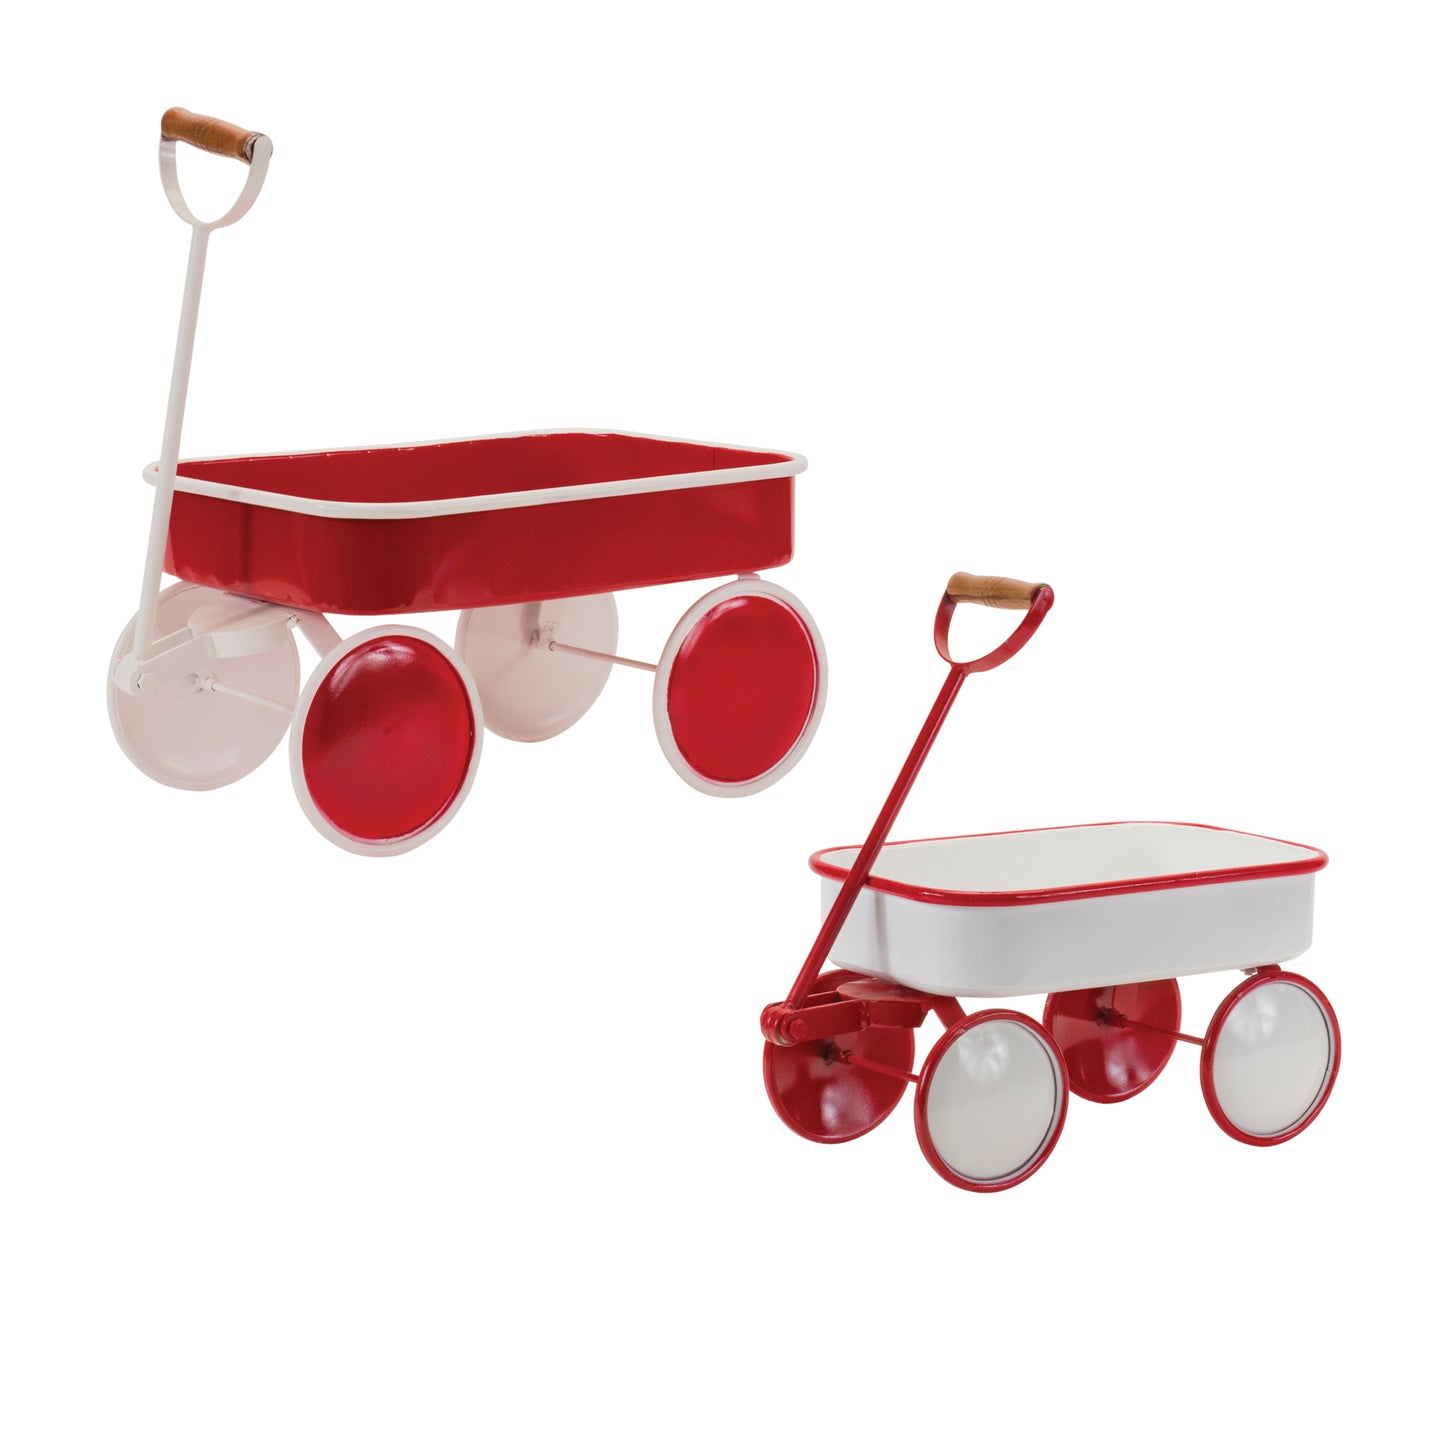 Small or Large Red & White Candy Themed Wagon Figurine